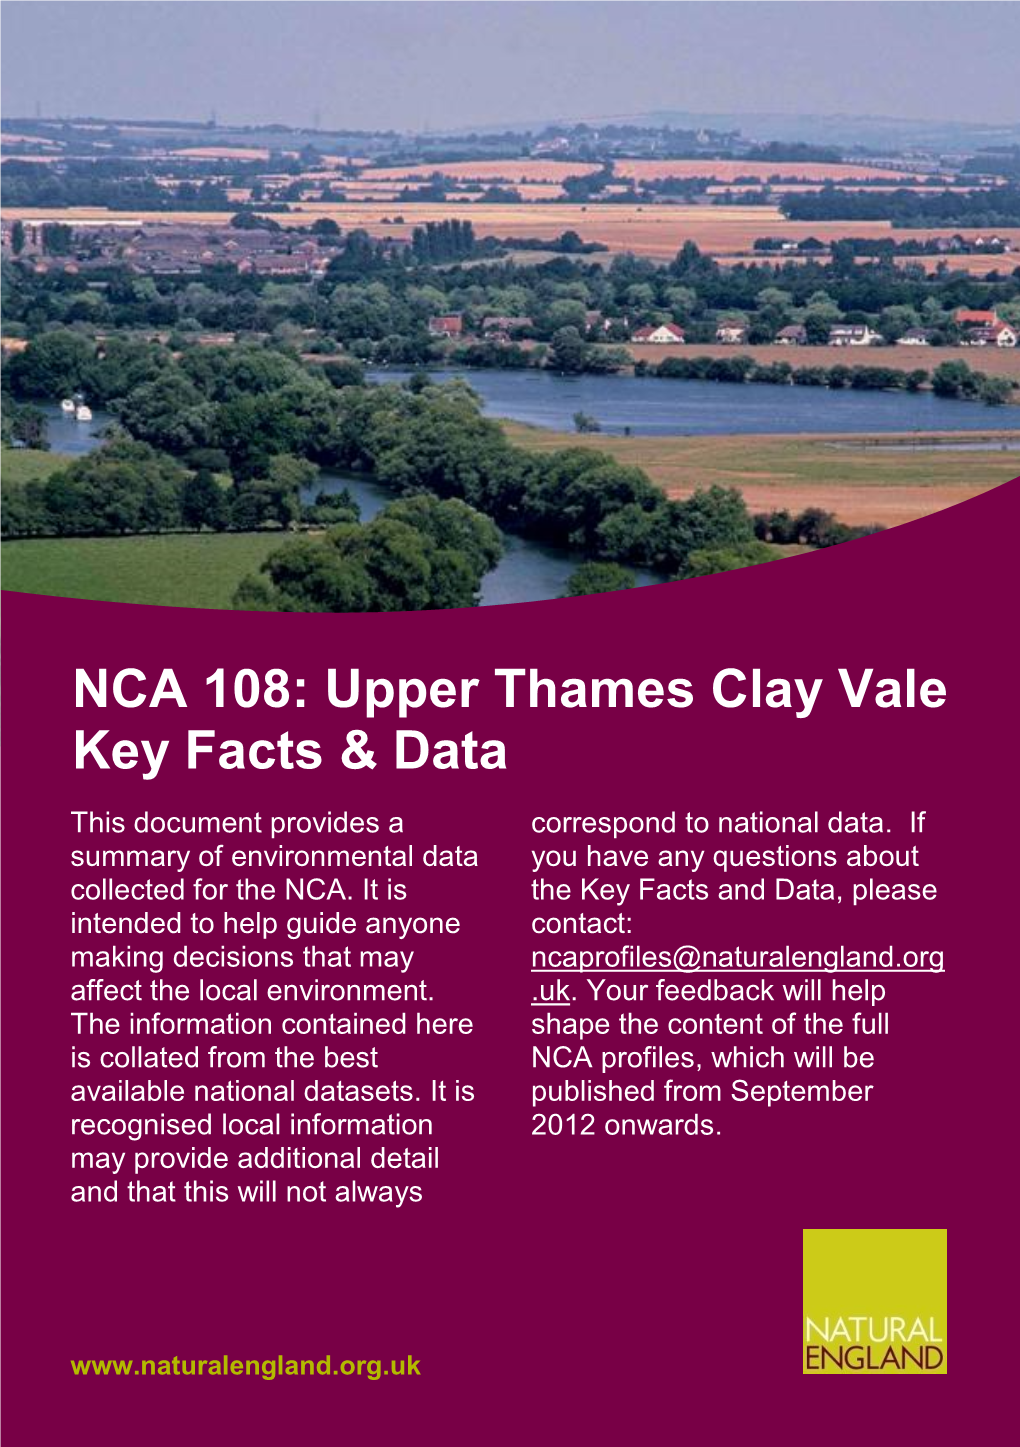 NCA 108: Upper Thames Clay Vale Key Facts & Data